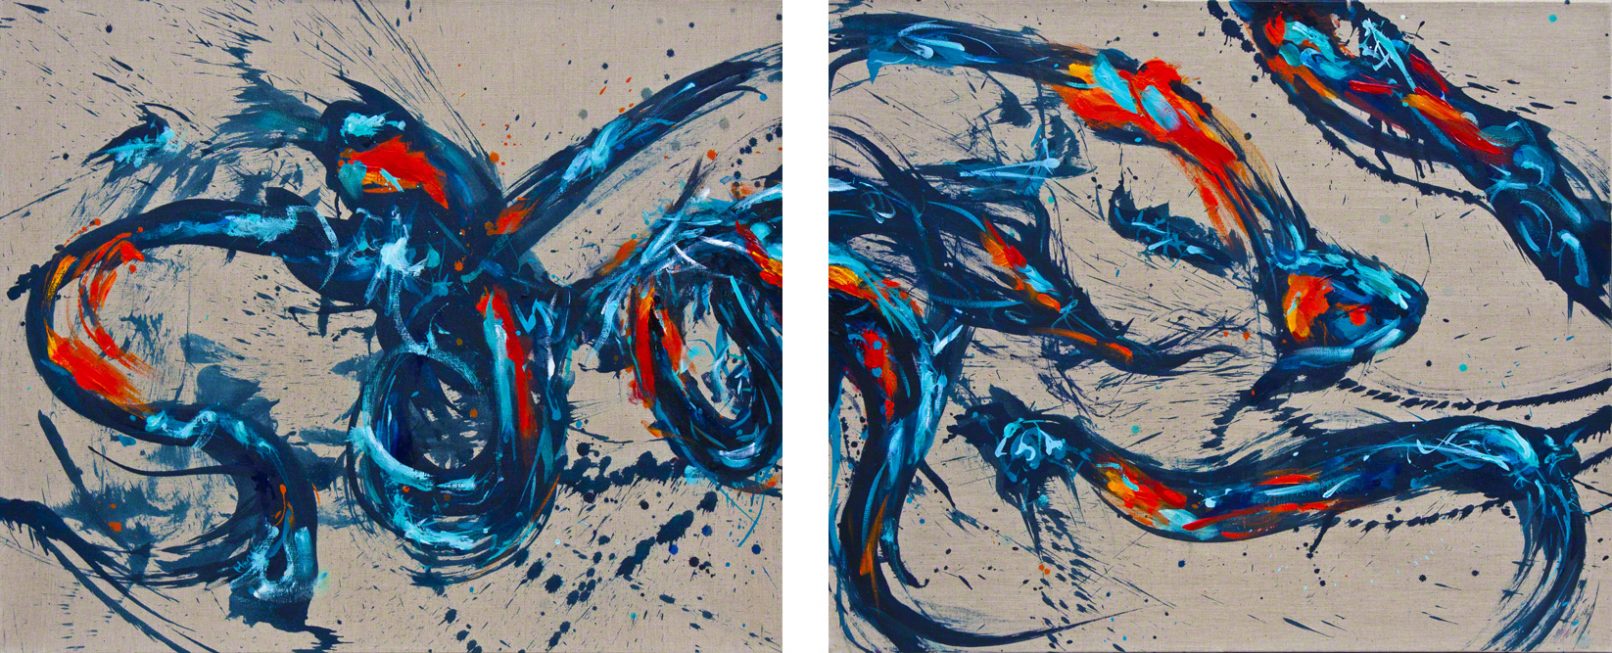 FLOW1&2-REVISITED - diptych - 240 x 100 cm , acrylic on prepared raw canvas, 2014.